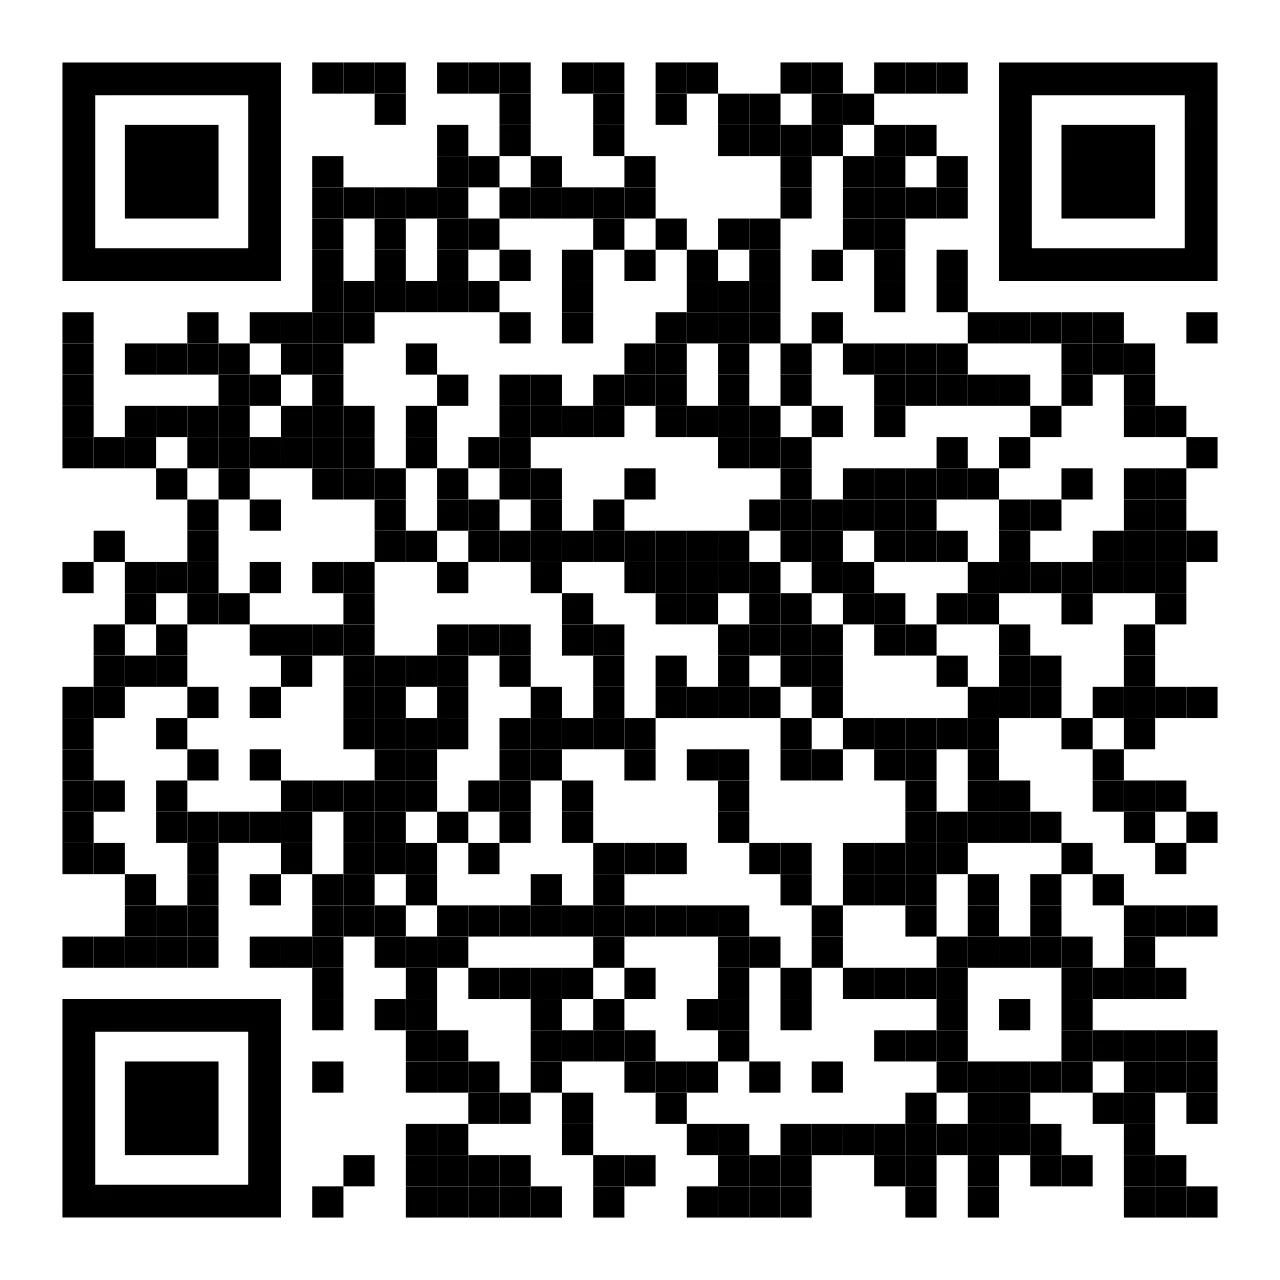 armed-forces-qrcode